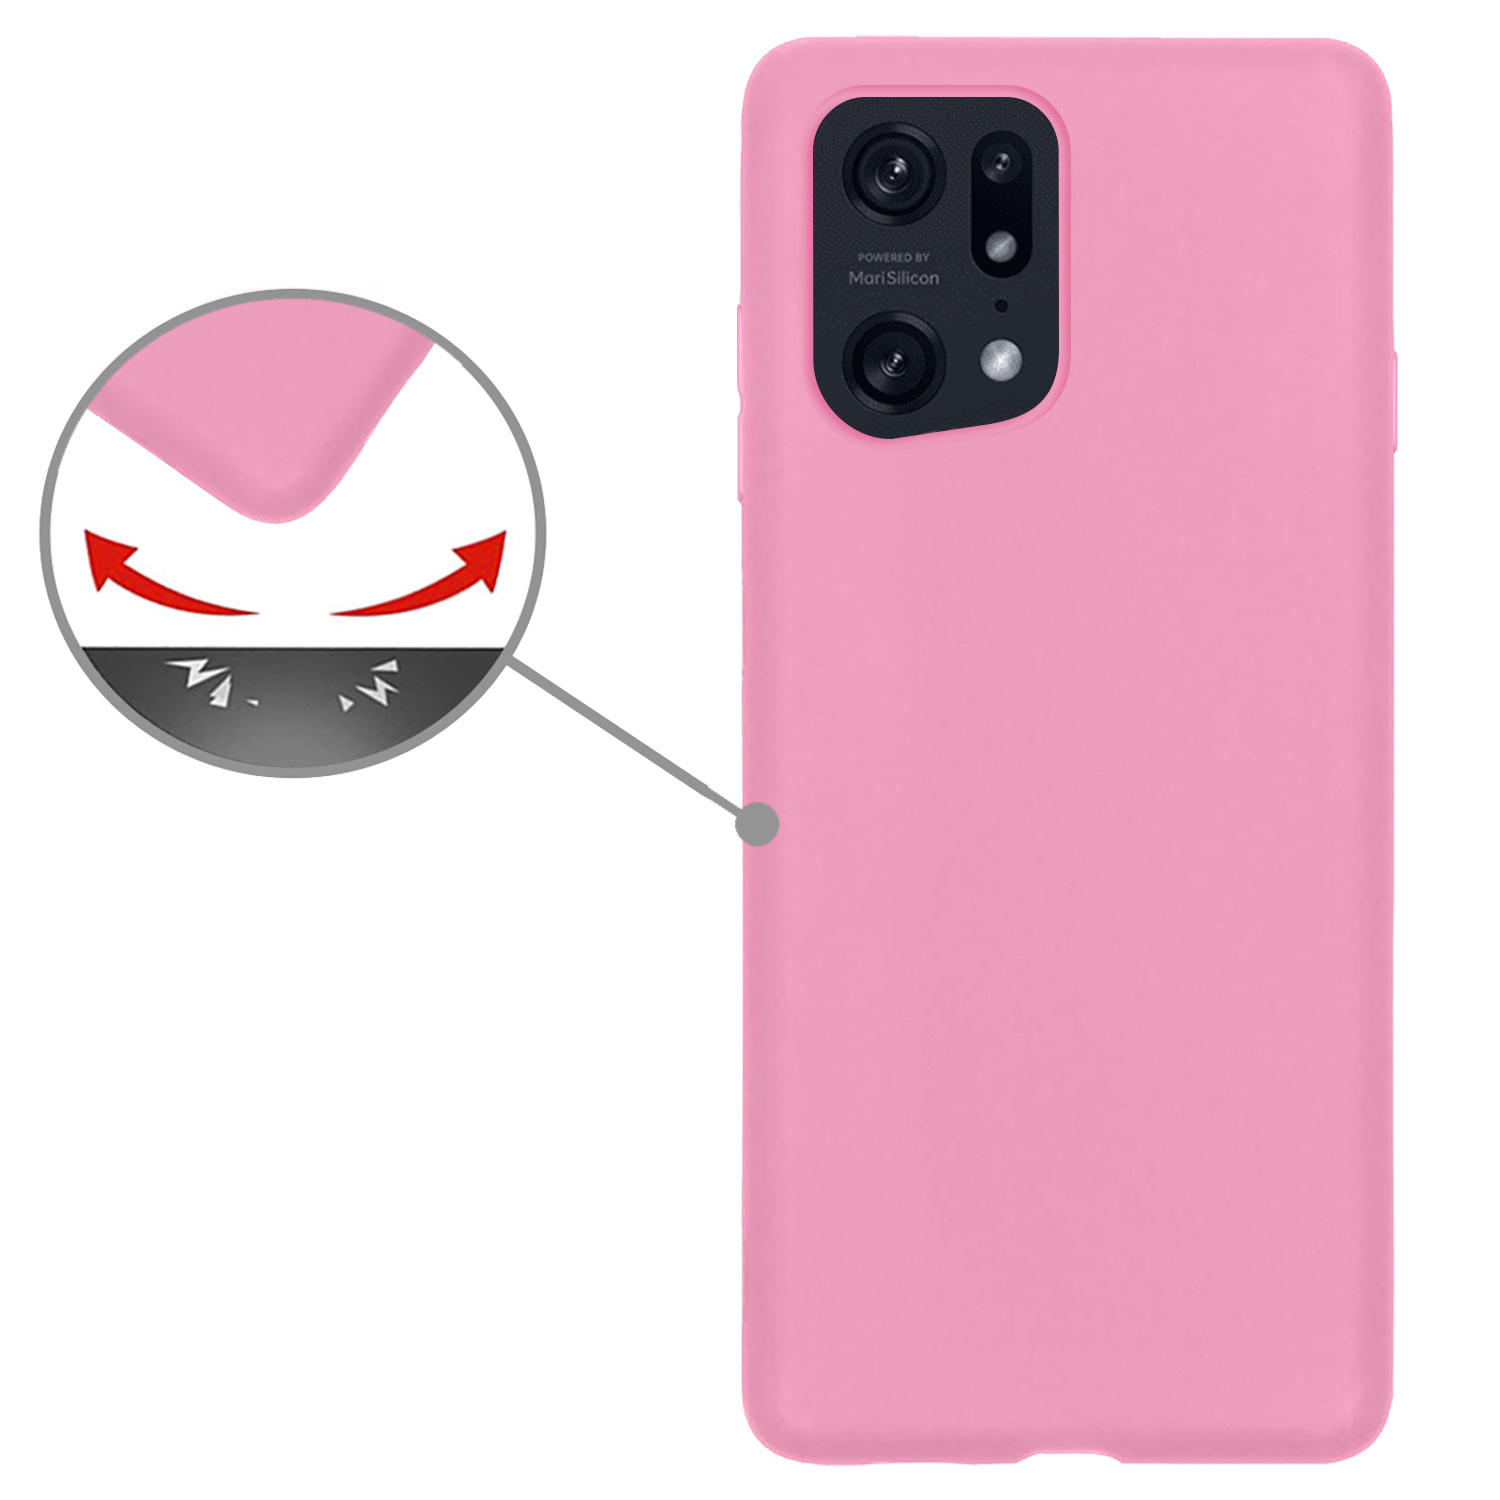 Nomfy OPPO Find X5 Pro Hoesje Siliconen Case Back Cover Met 2x Screenprotector - OPPO Find X5 Pro Hoes Cover Silicone - Licht Roze